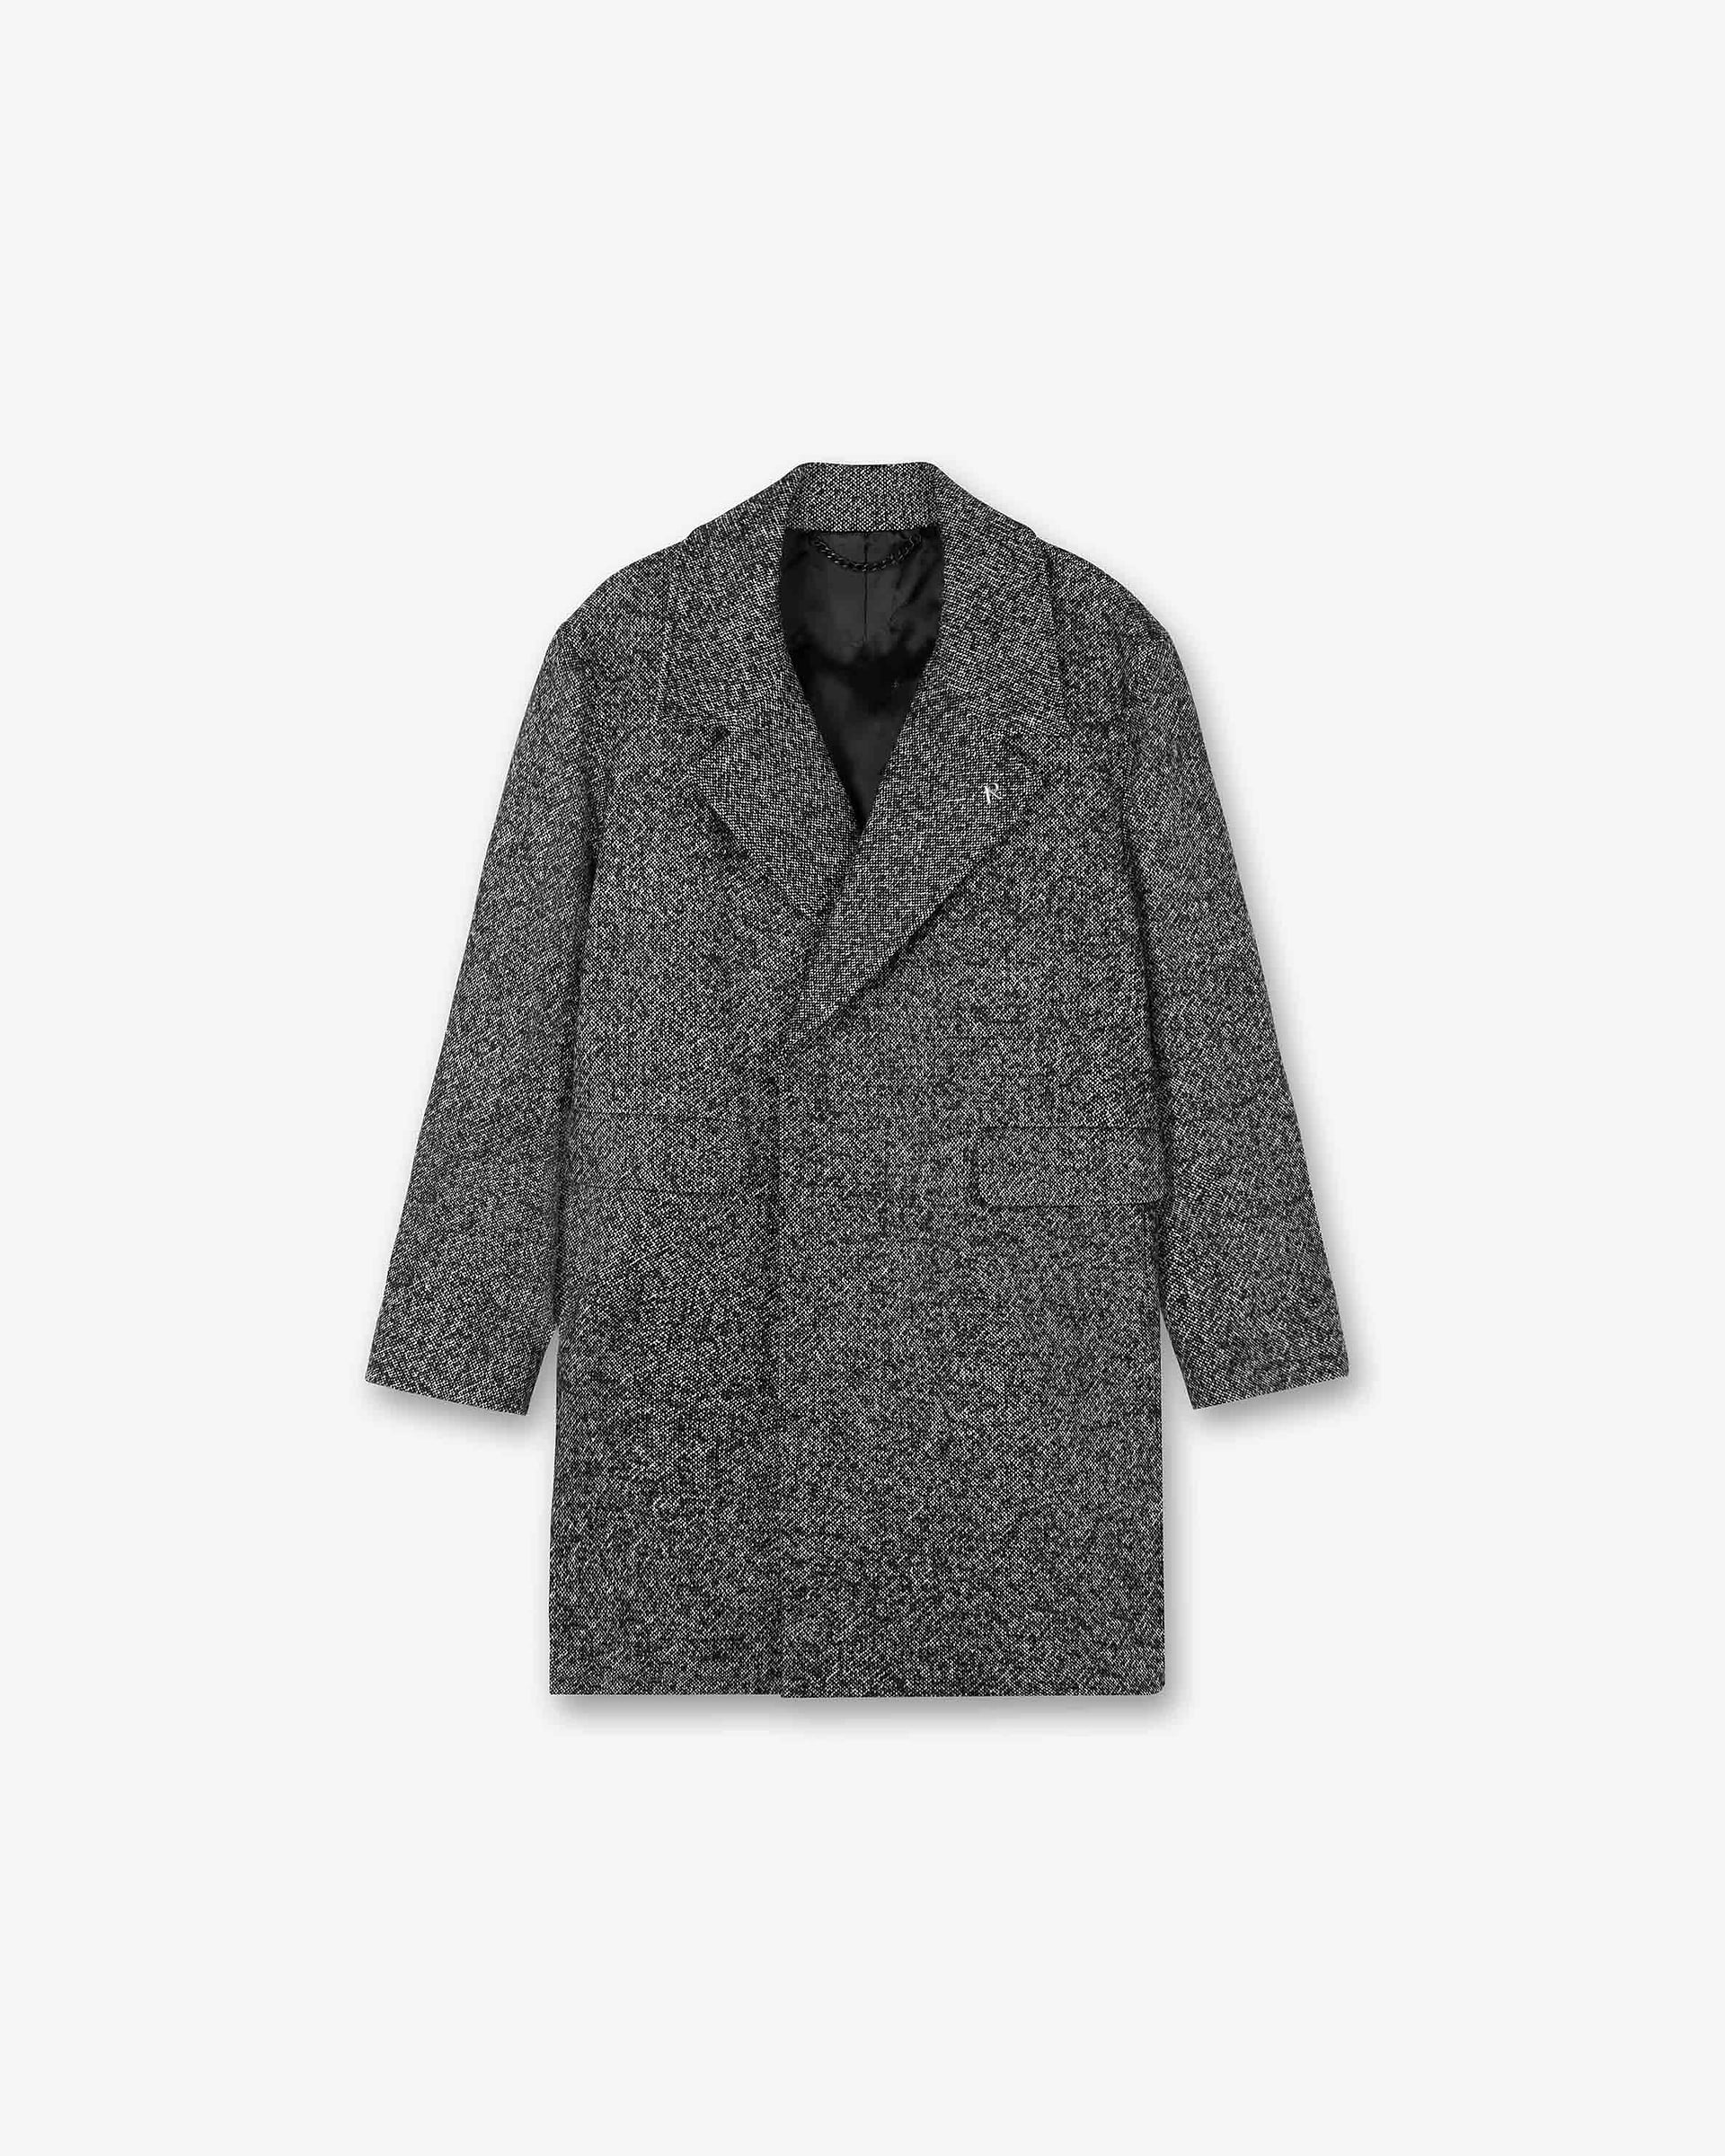 Double Breasted Overcoat - Black White